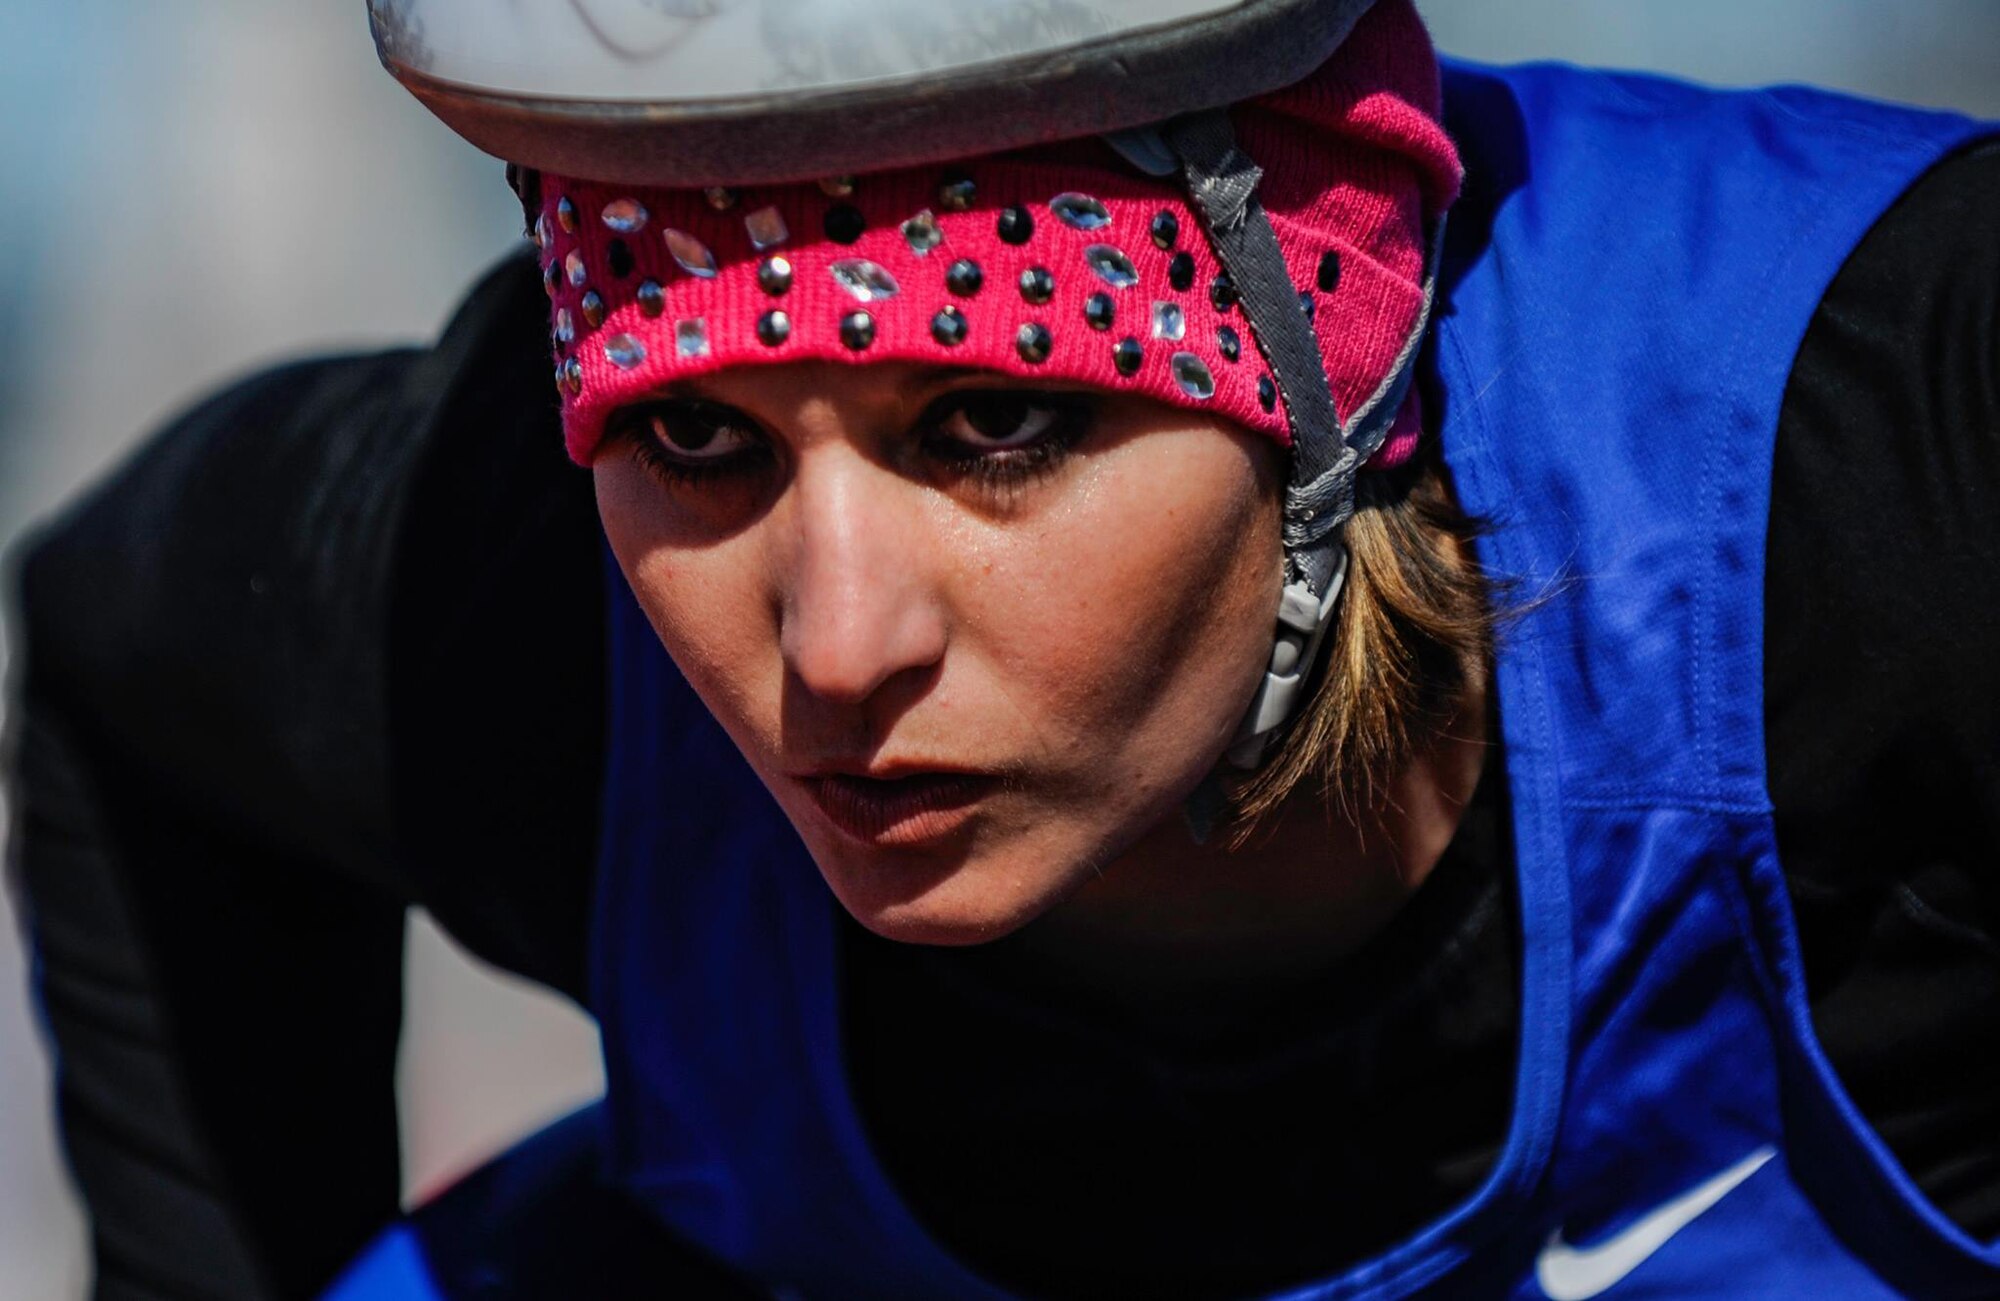 Ashley Crites, Air Force Wounded Warrior Trials competitor, waits to hear the starter’s pistol before the 400-meter cycling competition of the AFW2 at Nellis Air Force Base, Nev., Feb. 28, 2017. The AFW2 Program's goal is to assist injured, ill and wounded-in-action Airmen. (U.S. Air Force photo by Airman 1st Class Kevin Tanenbaum/Released)